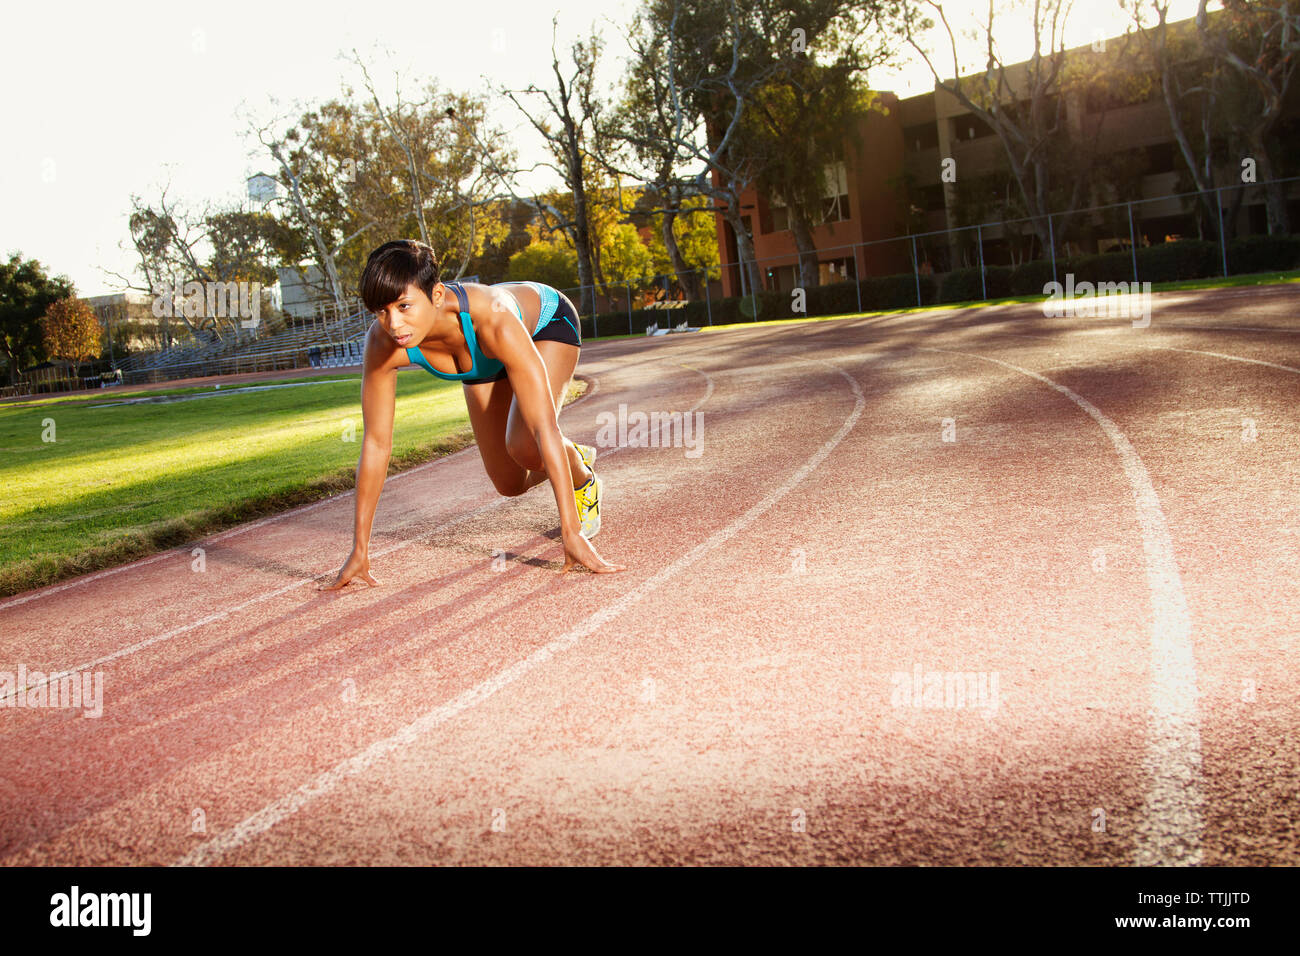 Woman preparing for running on sports track Stock Photo